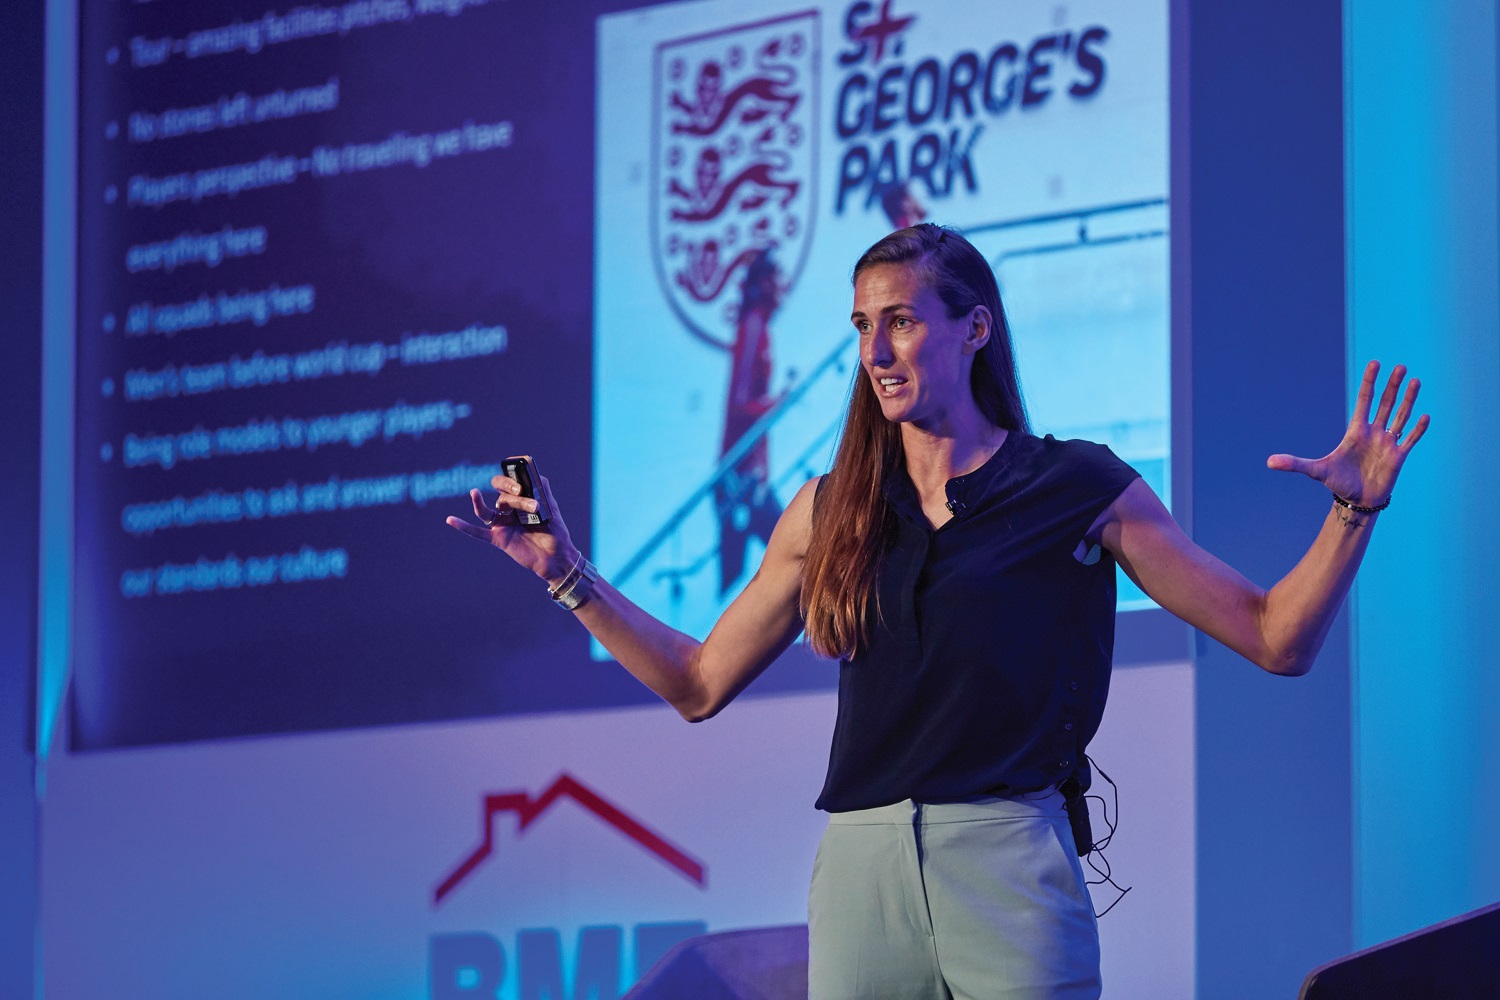 NMBS has announced the full programme and speaker details for its first ever Women in Industry Conference.